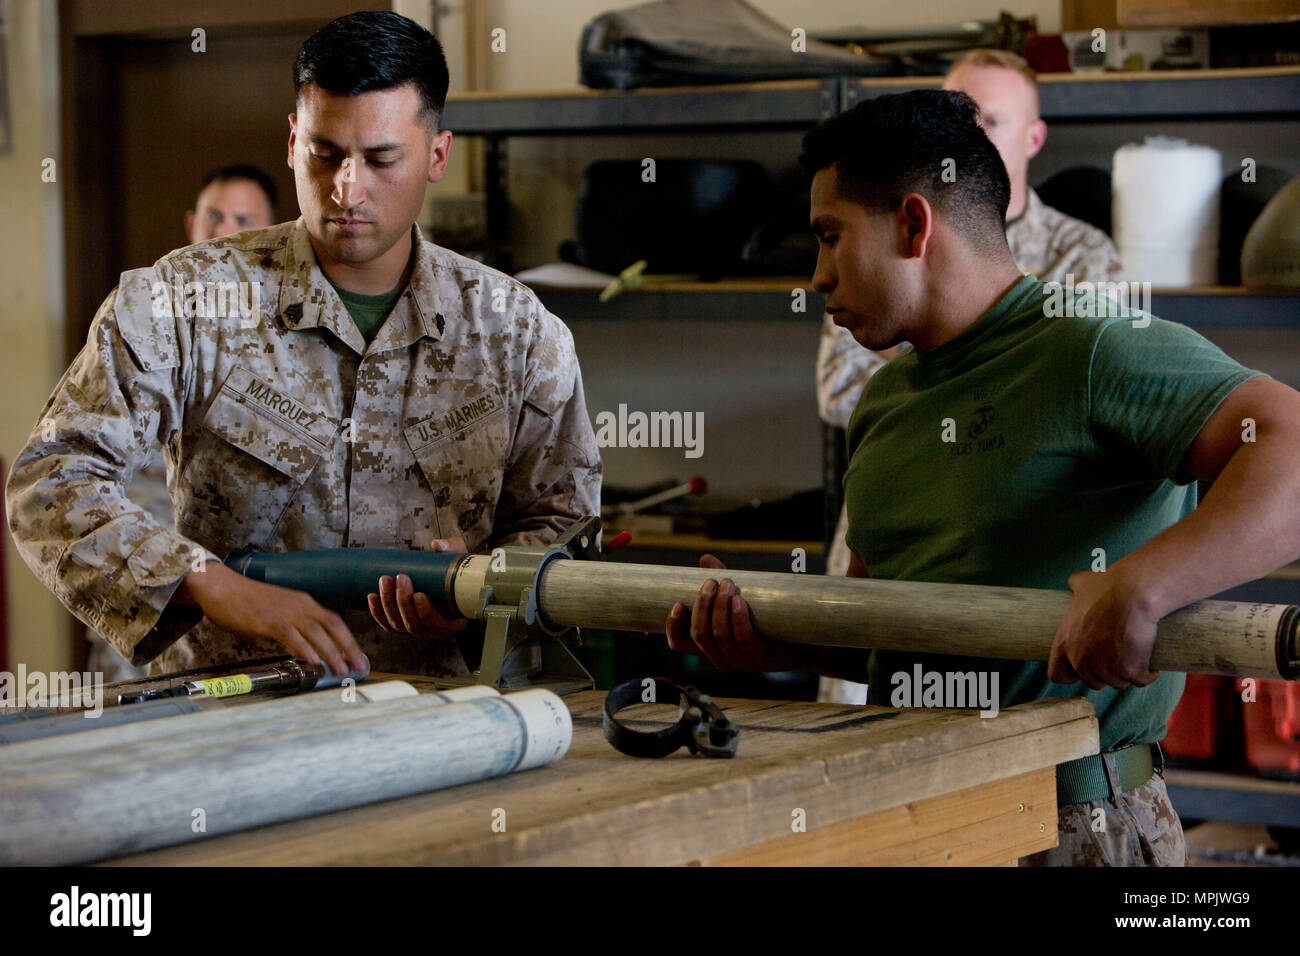 U.S. Marine Corps Sgt. Rodrigo Marquez, left, and Cpl. Jose S. Ramirez, aviation ordnance system technicians with Marine Aviation Logistics Squadron 39 (MALS-39) give a period of instruction on the Advance Precision Kill Weapon System II (APKWS II) during the first ever Aircraft Maintenance Officer Course (AAMOC) at Marine Corps Air Station Yuma, Ariz., March 17, 2017. AAMOC will empower Aircraft Maintenance Officers with leadership tools, greater technical knowledge, and standardized practices through rigorous academics and hands on training in order to decrease ground related mishaps and inc Stock Photo